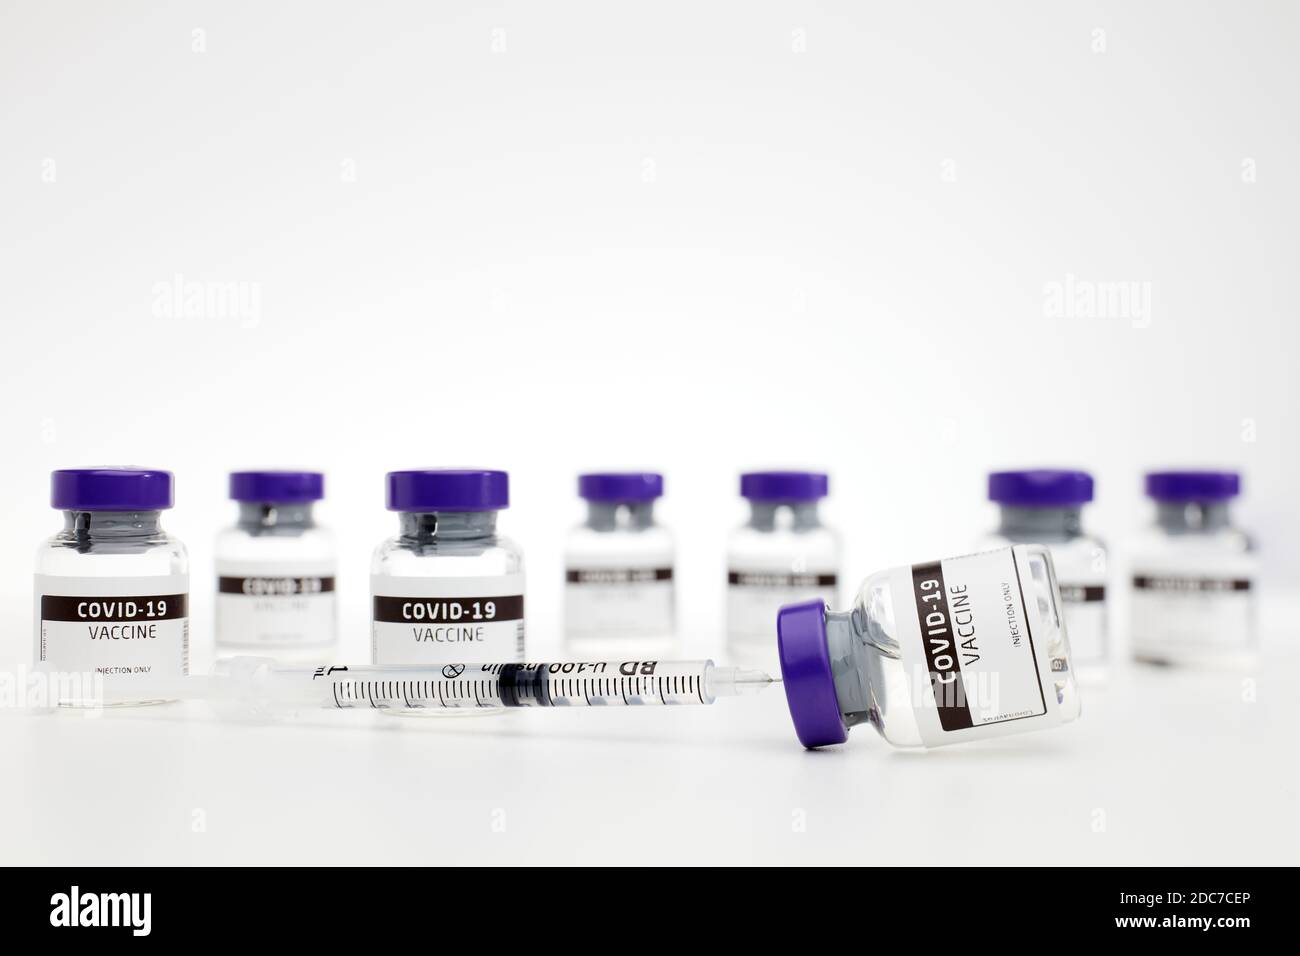 Closeup of vaccine phials for the treatment of coves-19 / coronavirus, pictured along with a syringe on white background Stock Photo